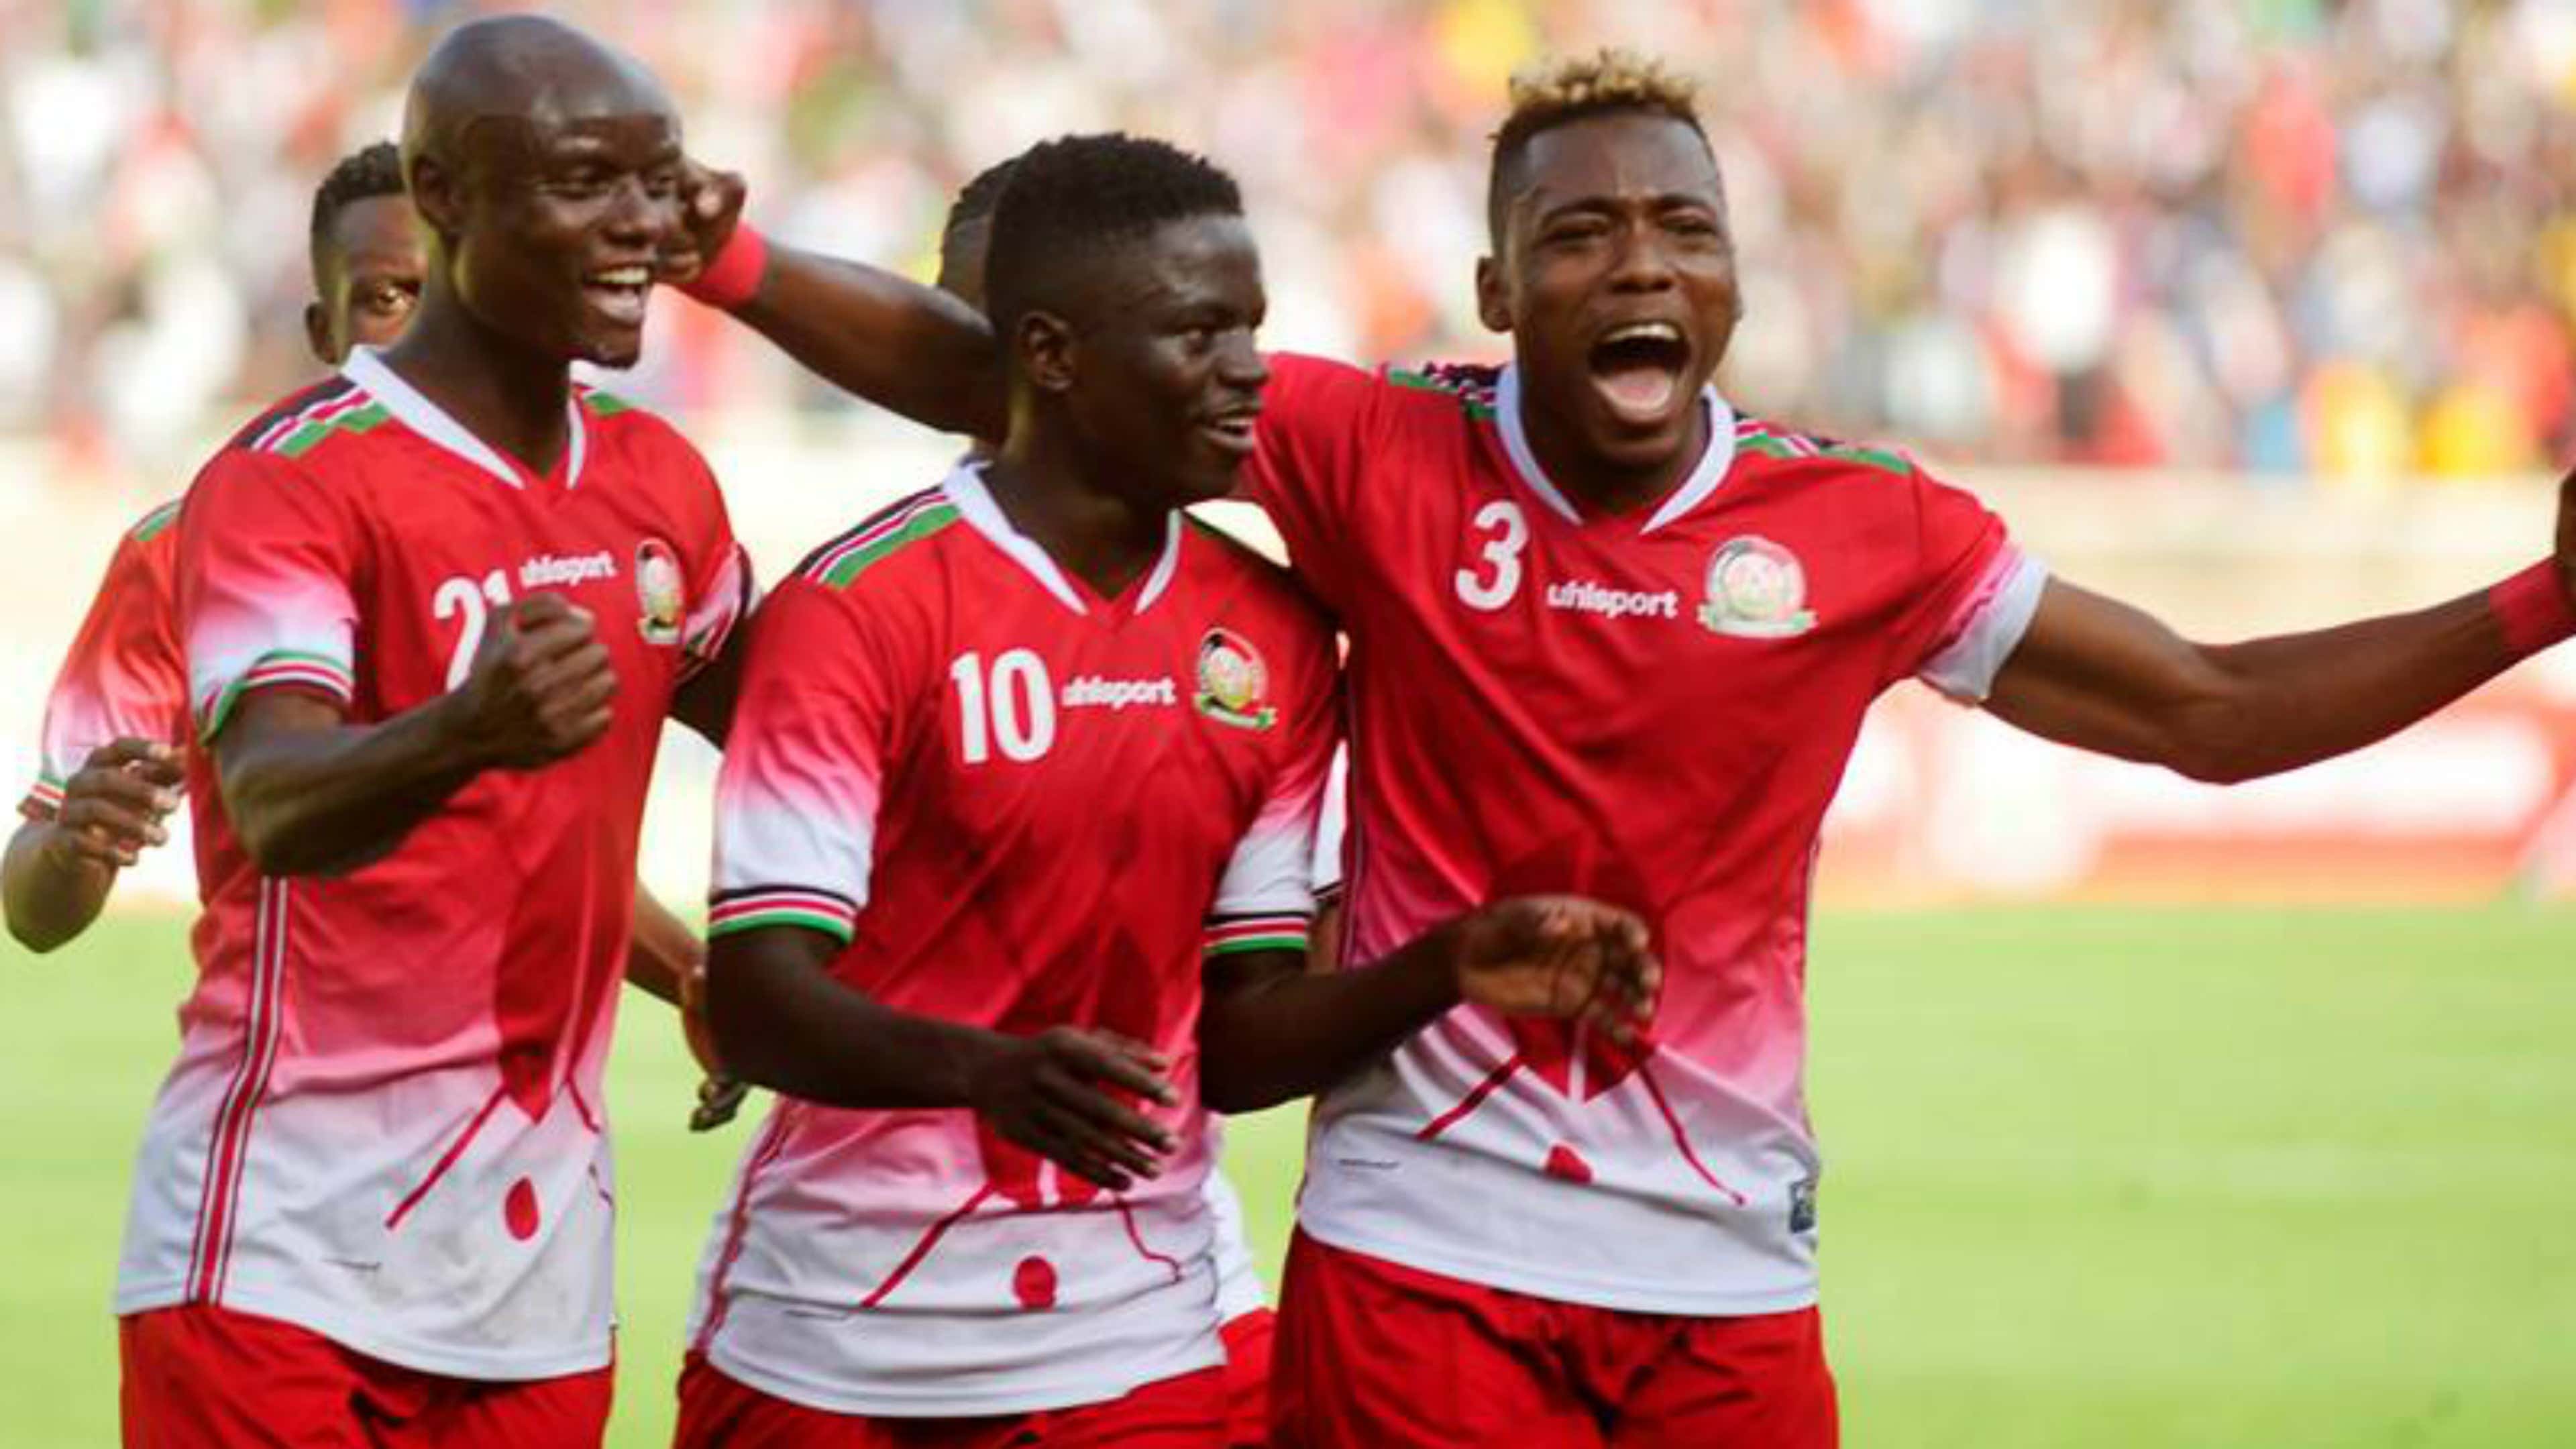 Someone tell me, what are Harambee Stars kit colours?